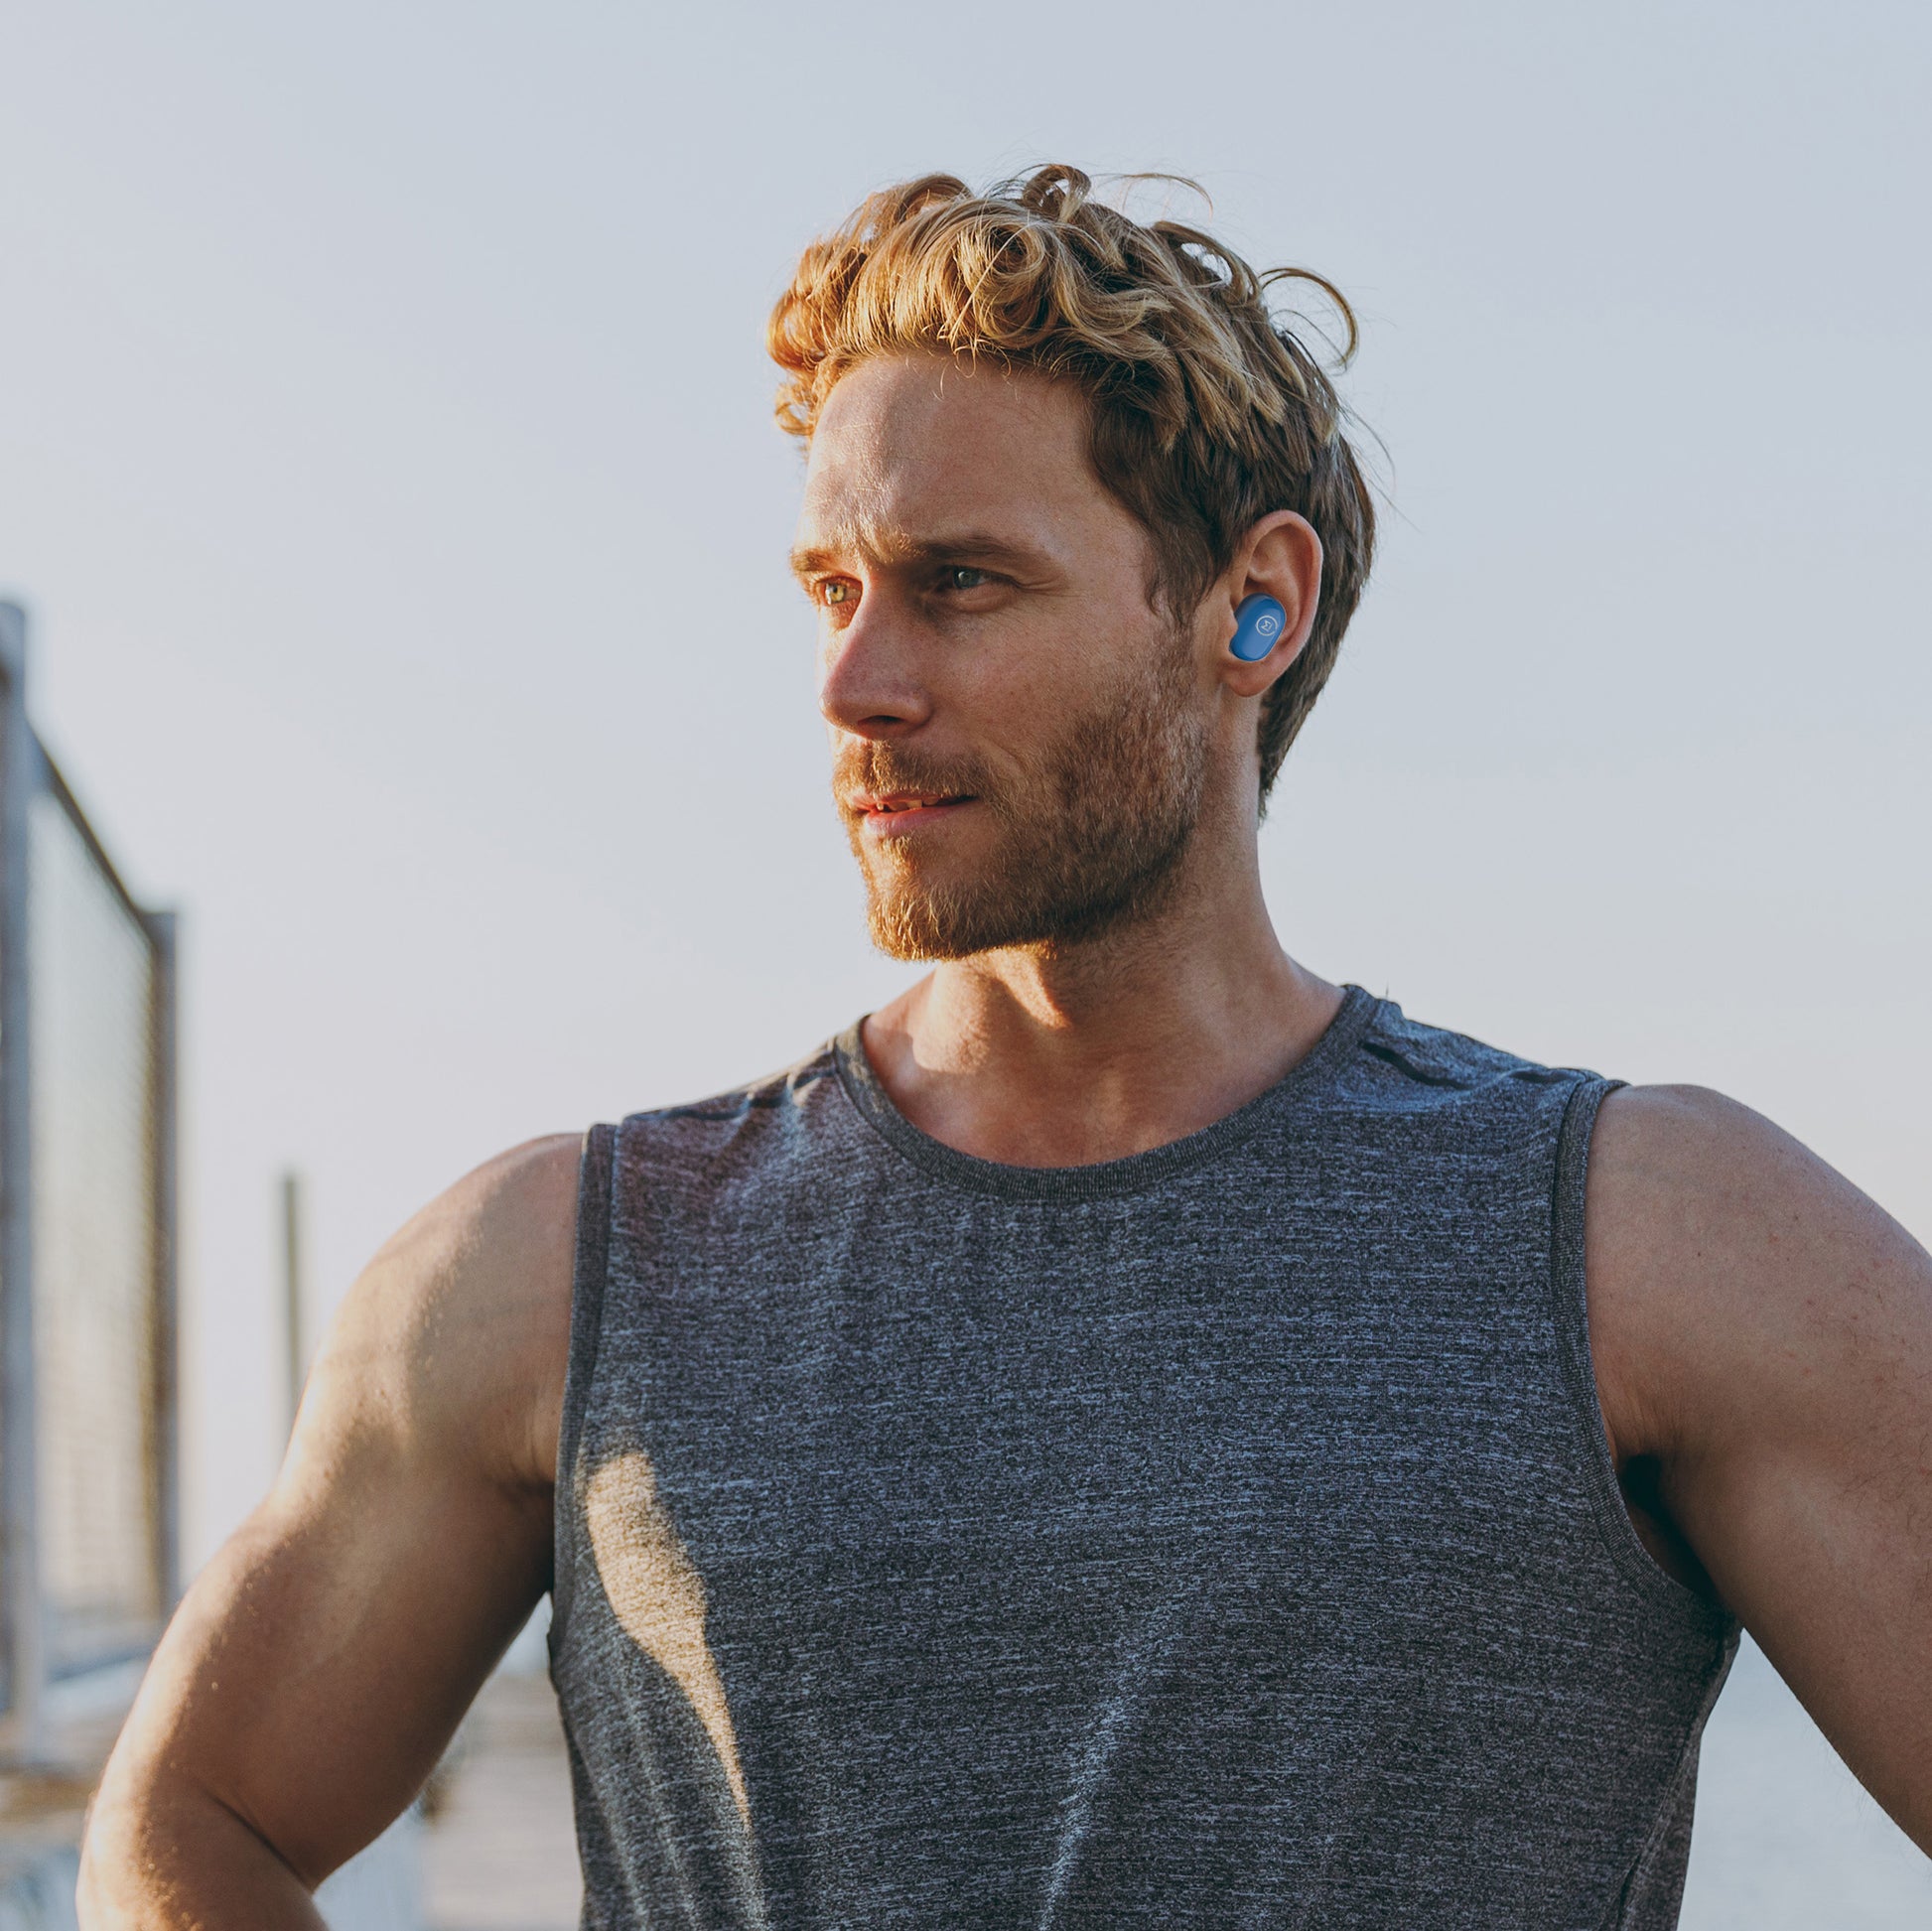 Photo of Morpheus 360 Spire True Wireless Earbuds shows a young athletic white man wearing Spire True Wireless earbuds while working out.